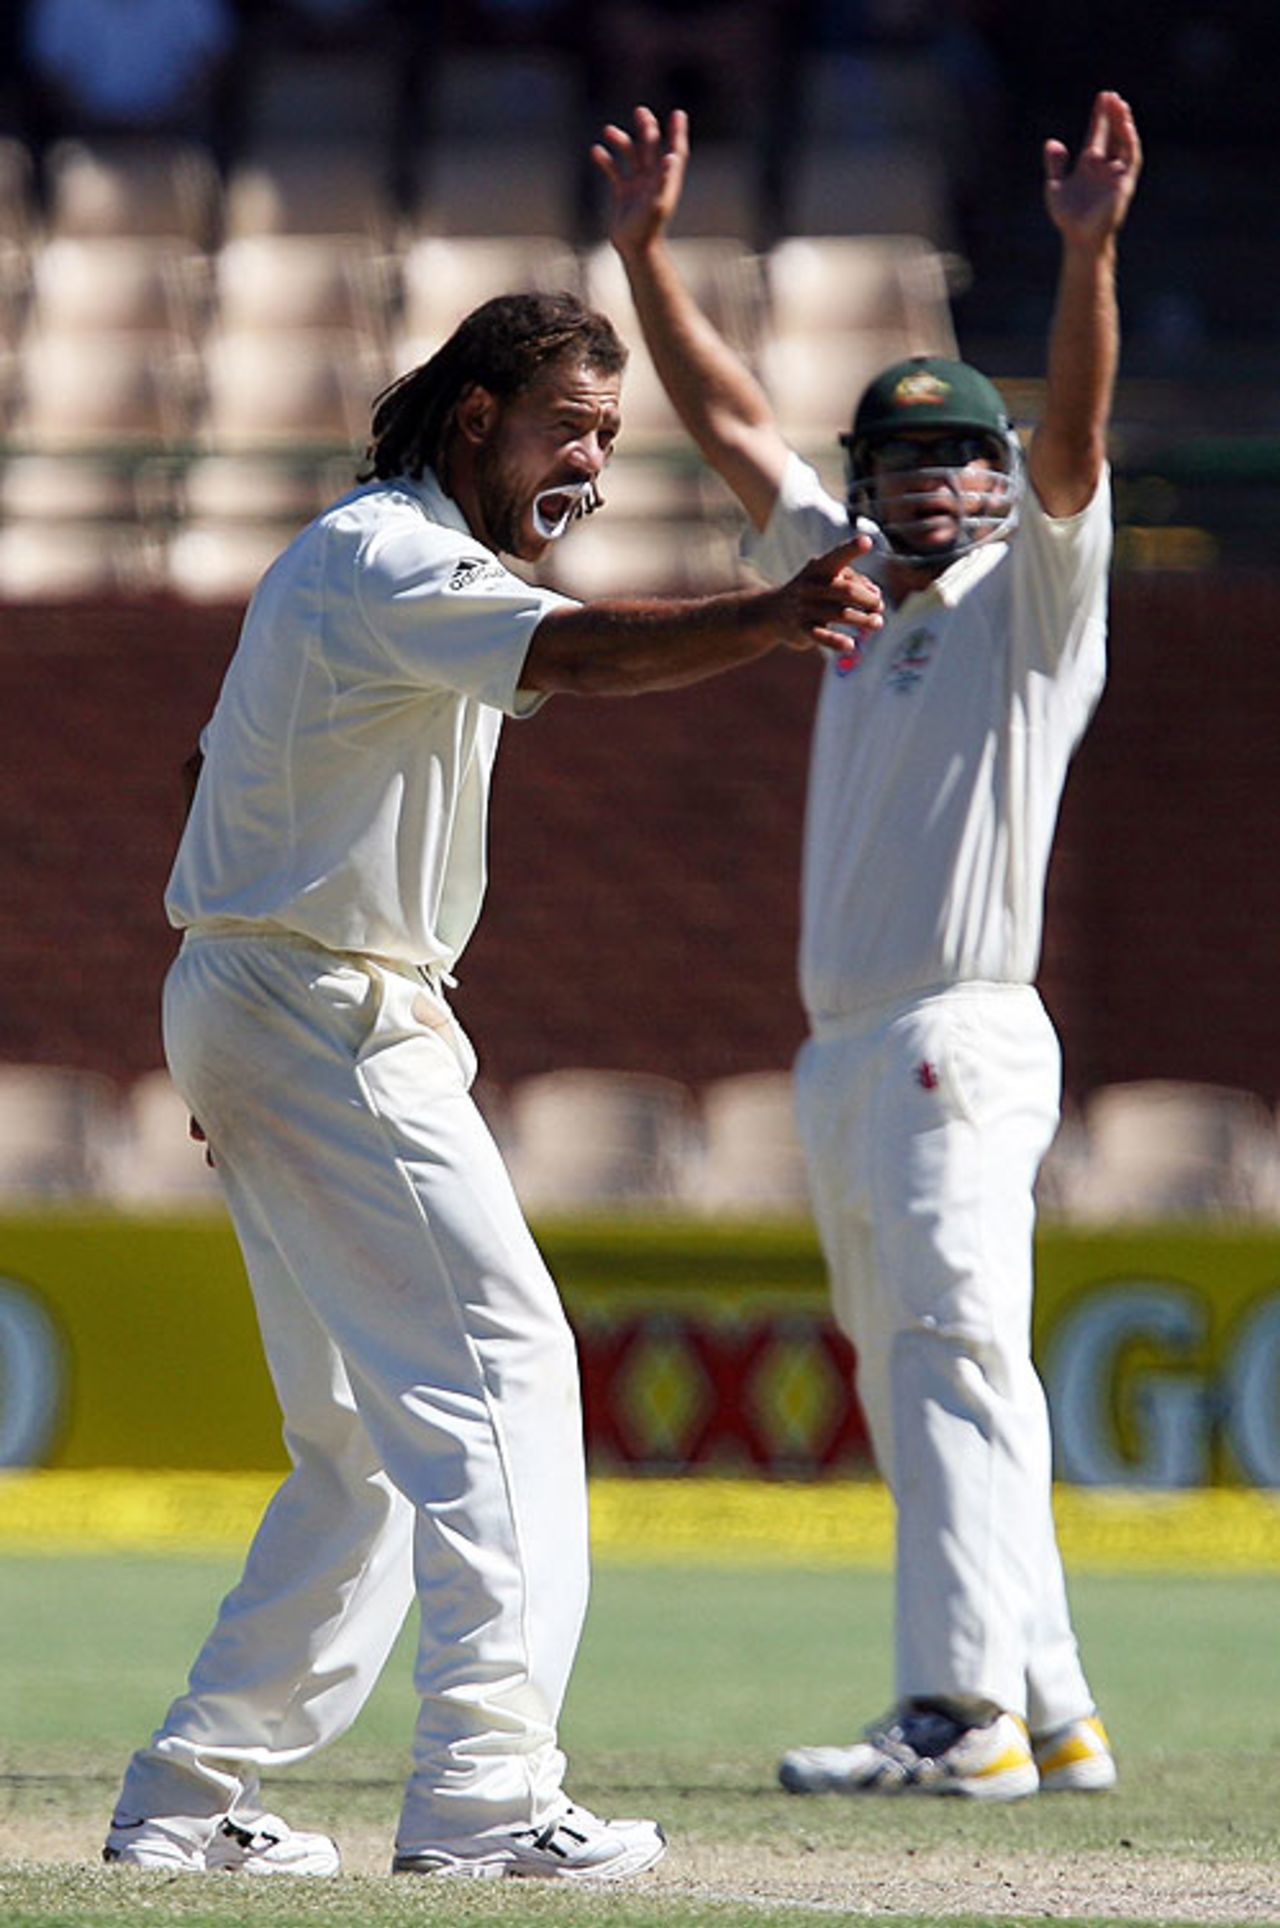 Andrew Symonds successfully appeals for Virender Sehwag, Australia v India, 4th Test, Adelaide, 5th day, January 28, 2008